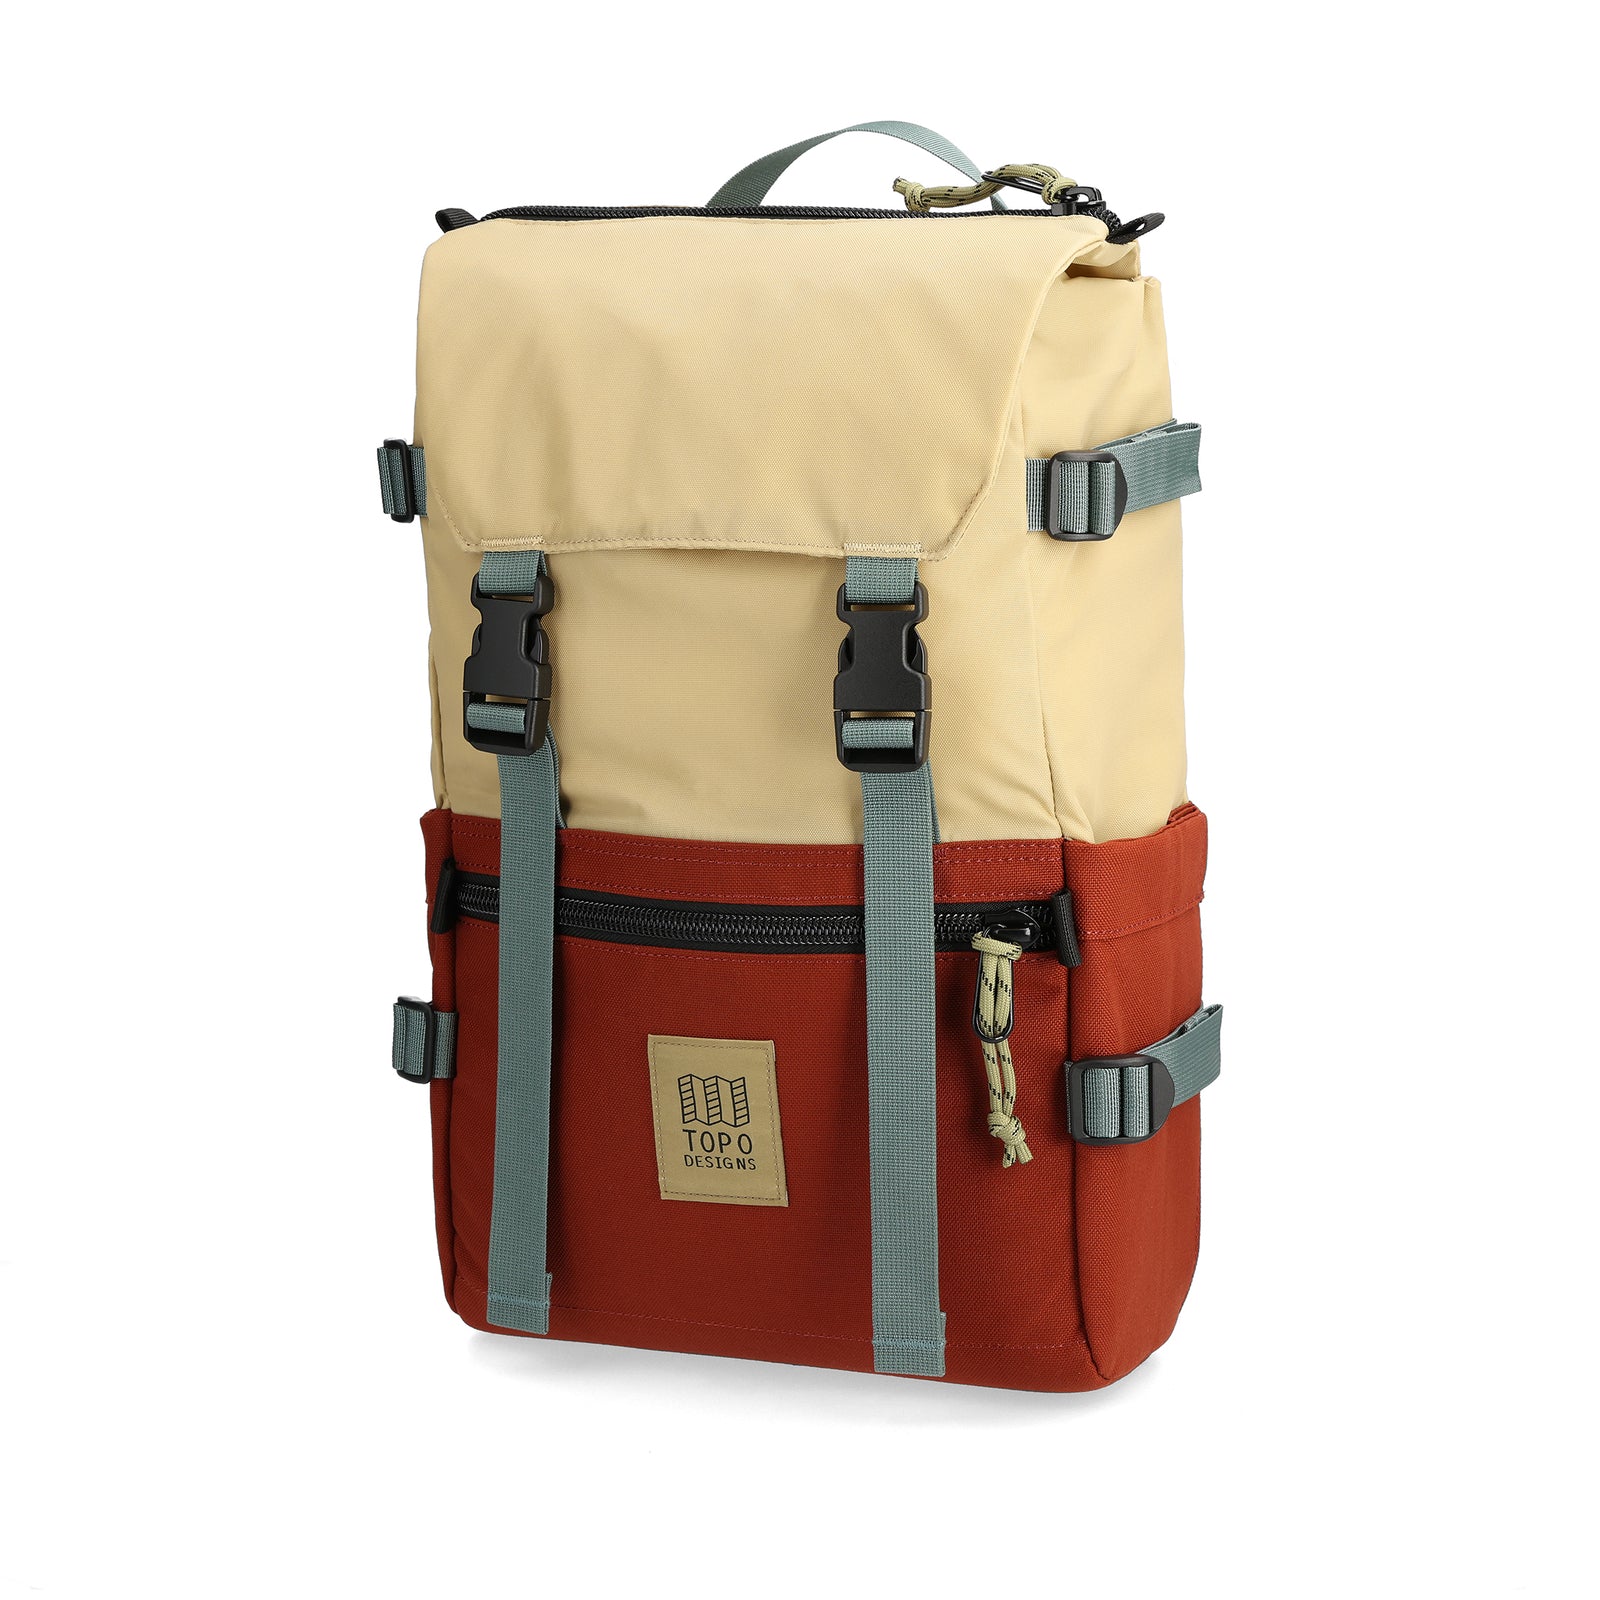 Front View of Topo Designs Rover Pack Classic in "Sahara / Fire Brick"